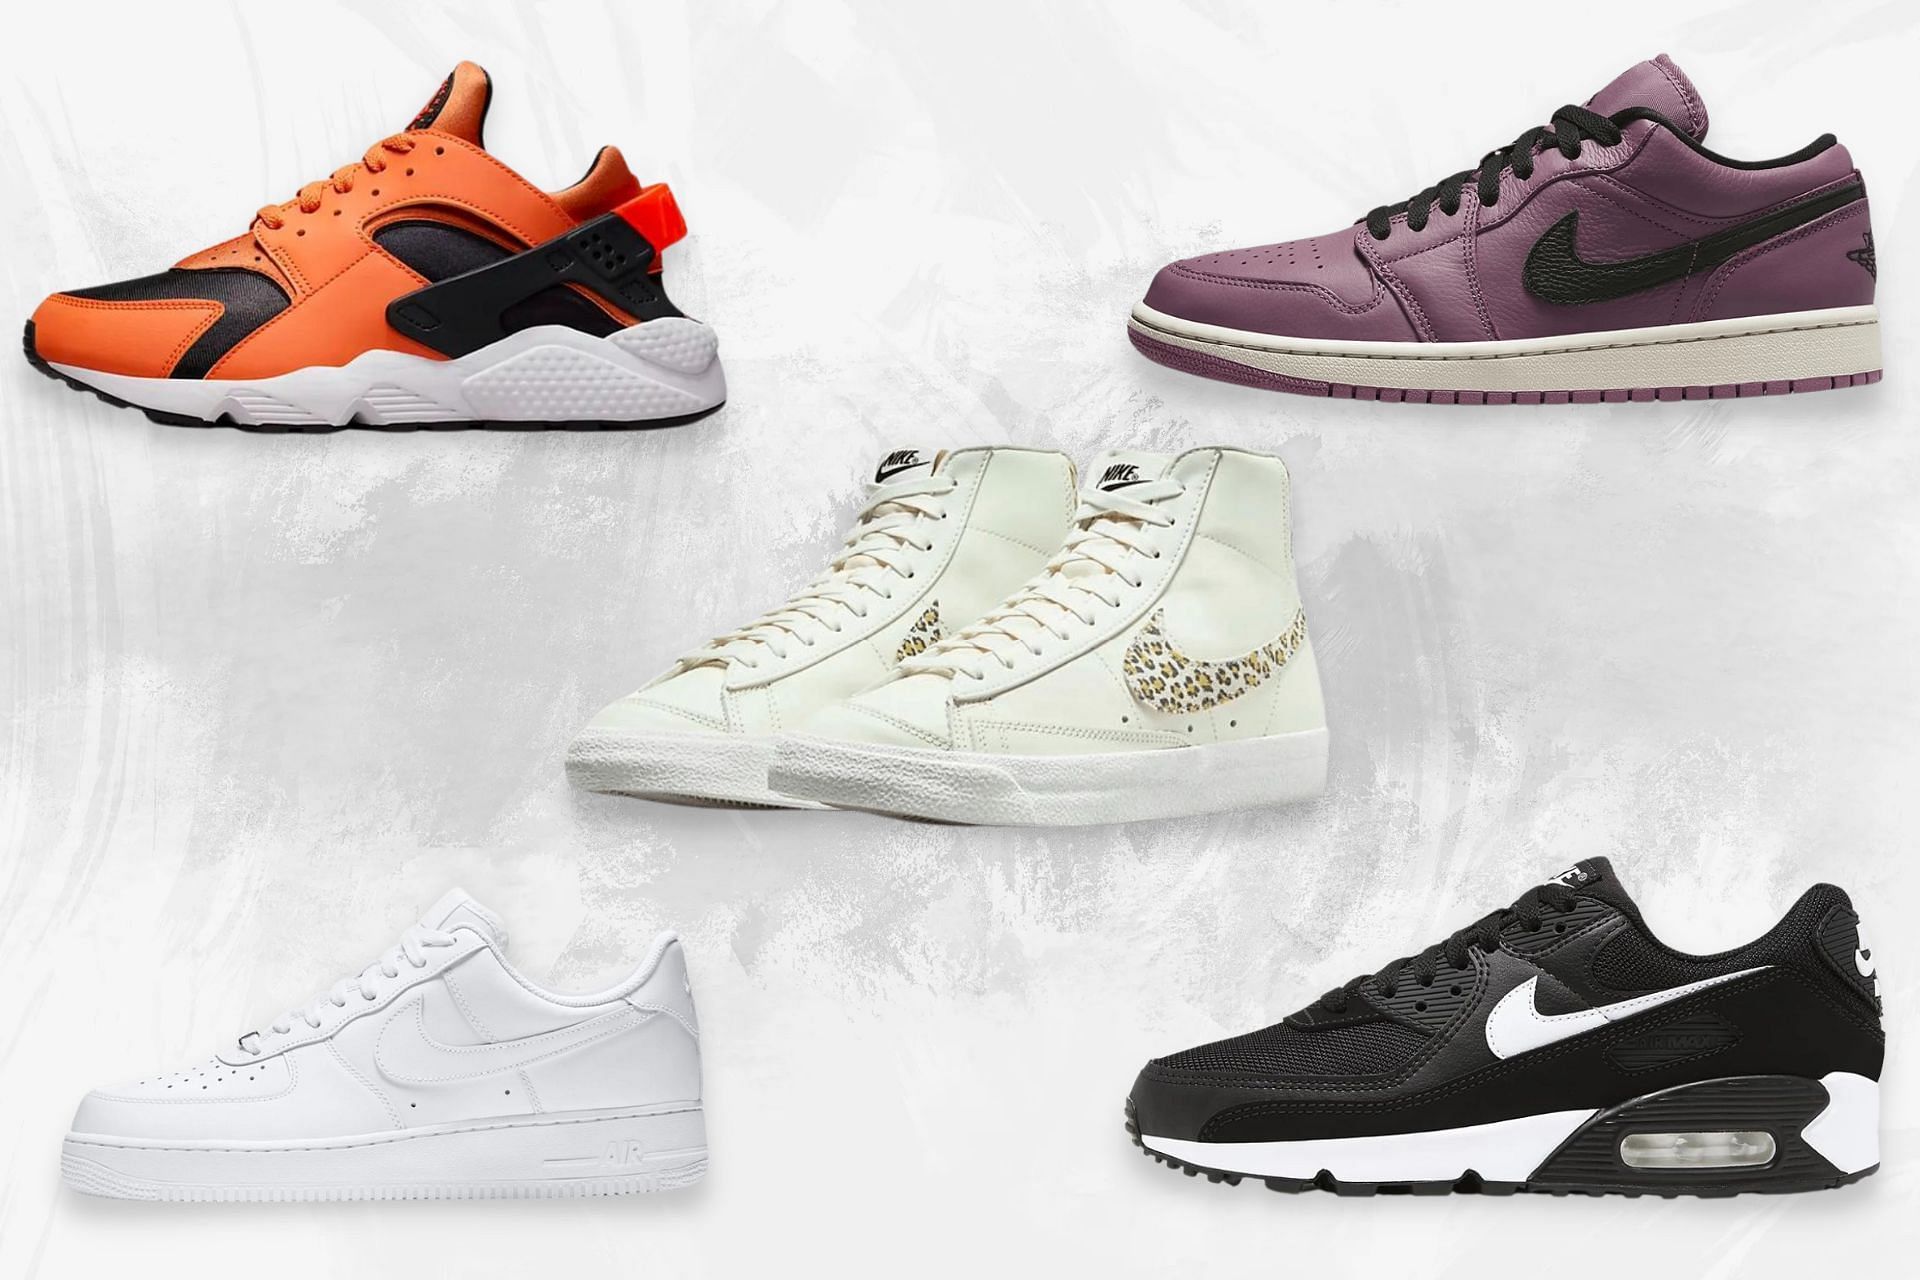 The Top 10 Best Nike Shoes of All Time – Eiken Shop